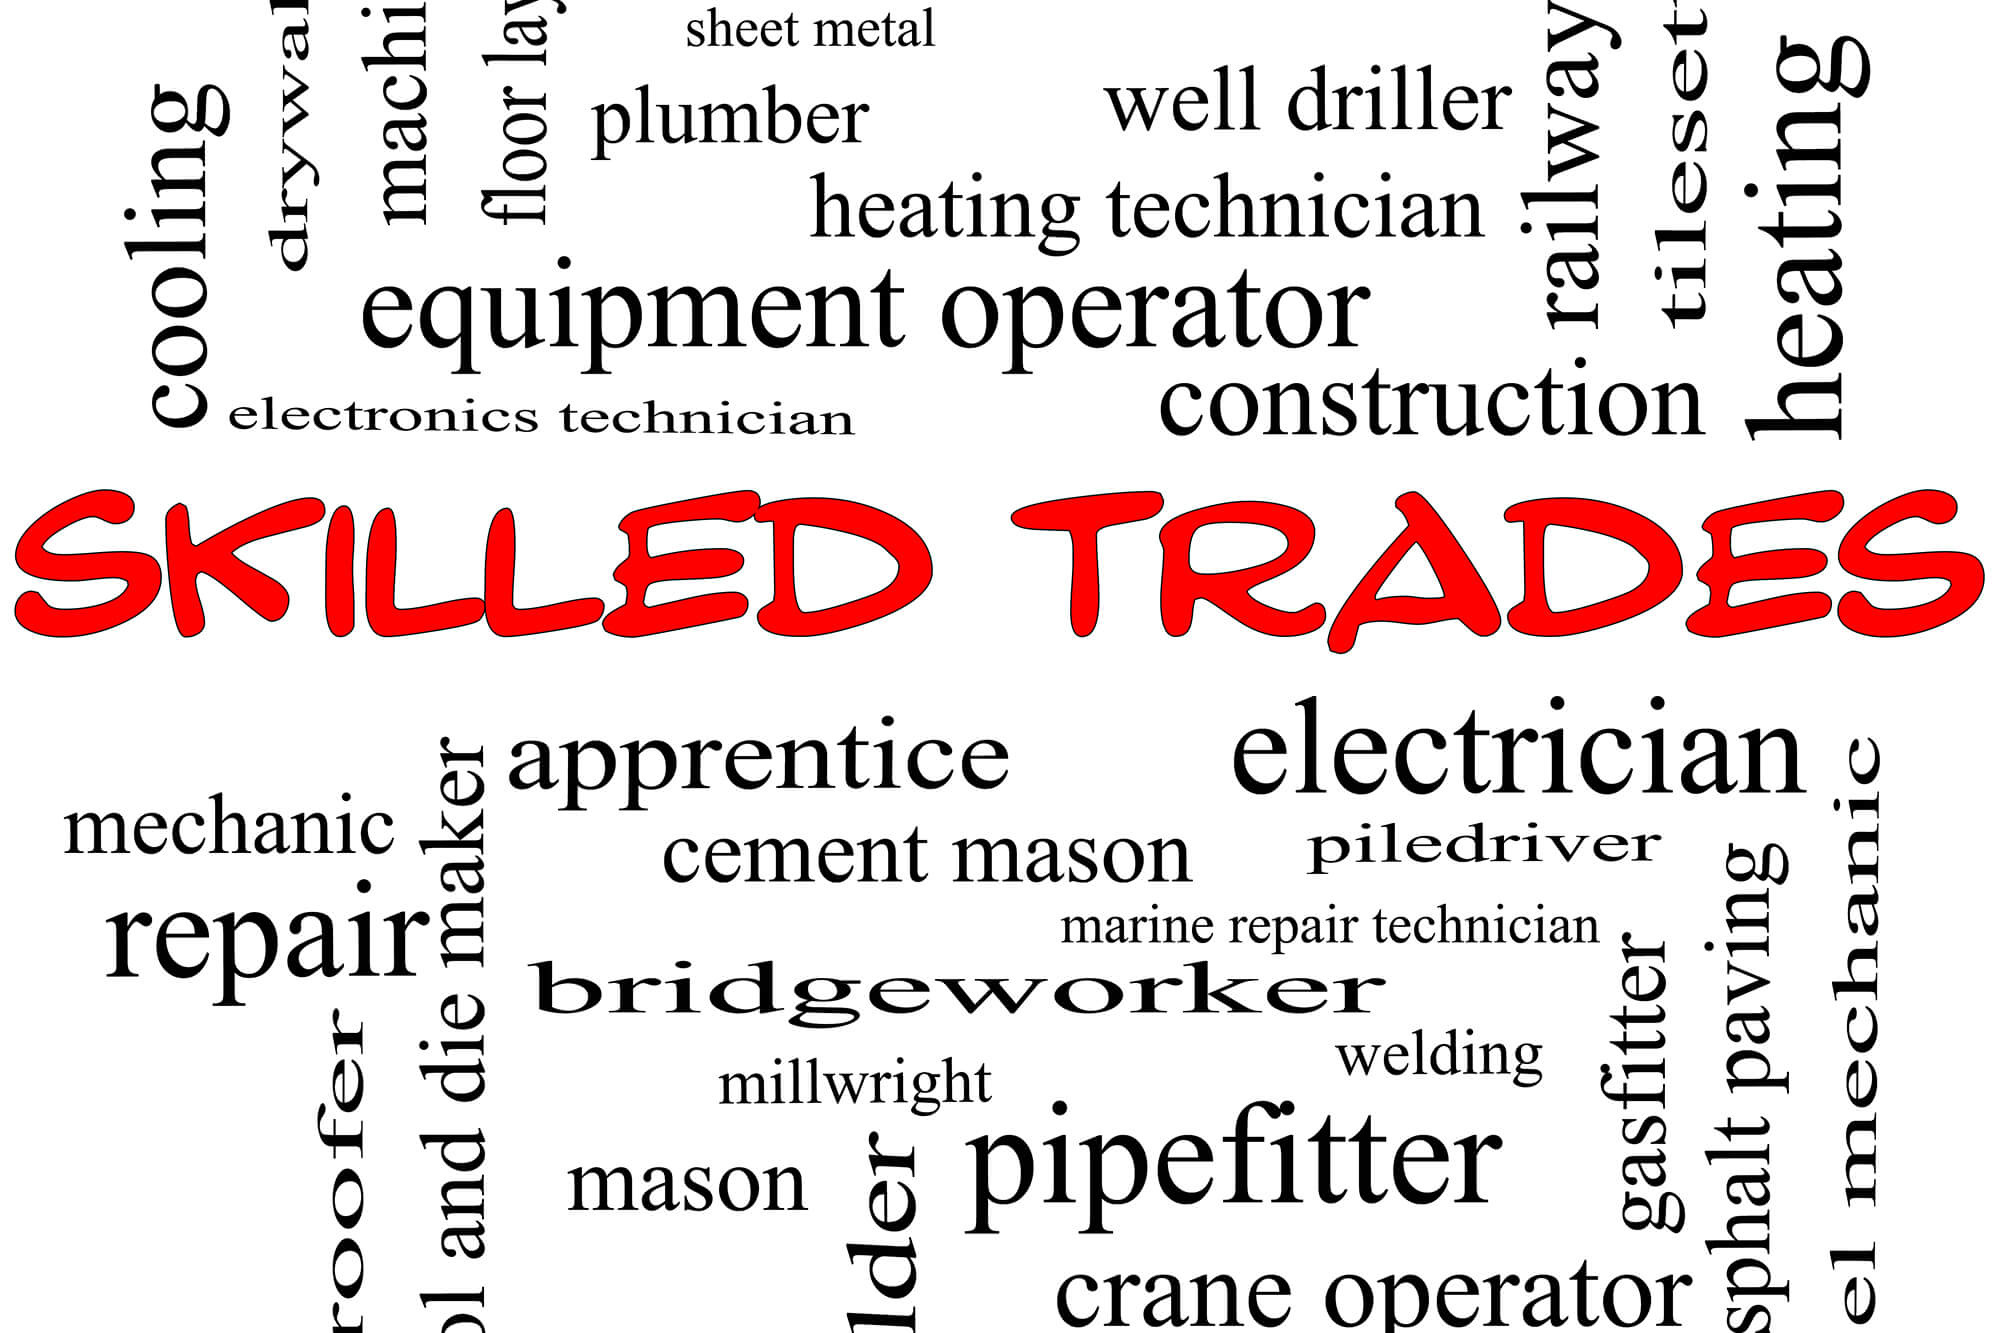 Image for skilled trades/Mike Rowe press release.